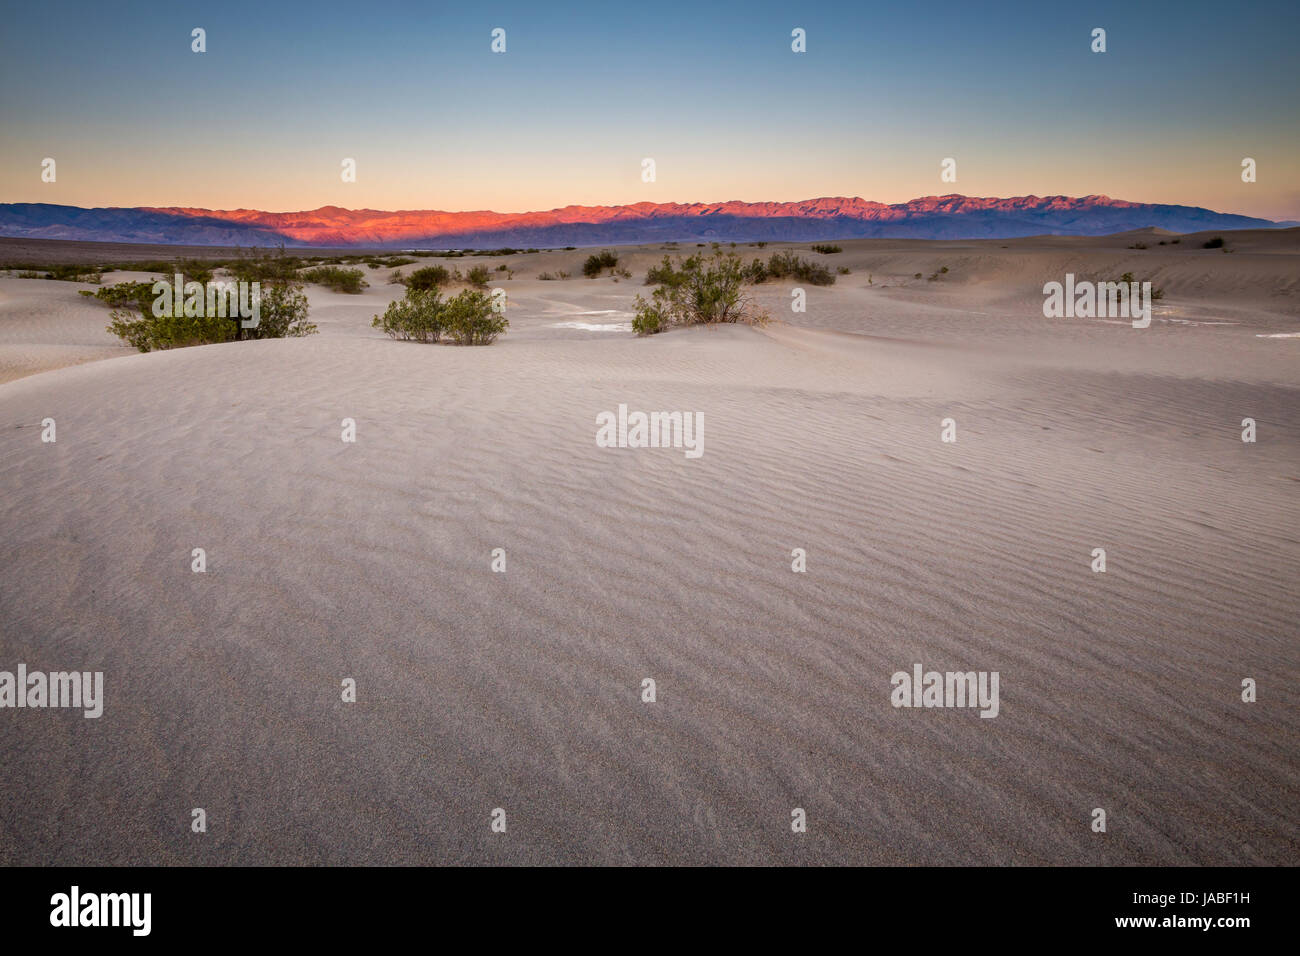 sunrise, Creosote Bushes, Mesquite Flat Sand Dunes, Death Valley National Park, Death Valley, California Stock Photo